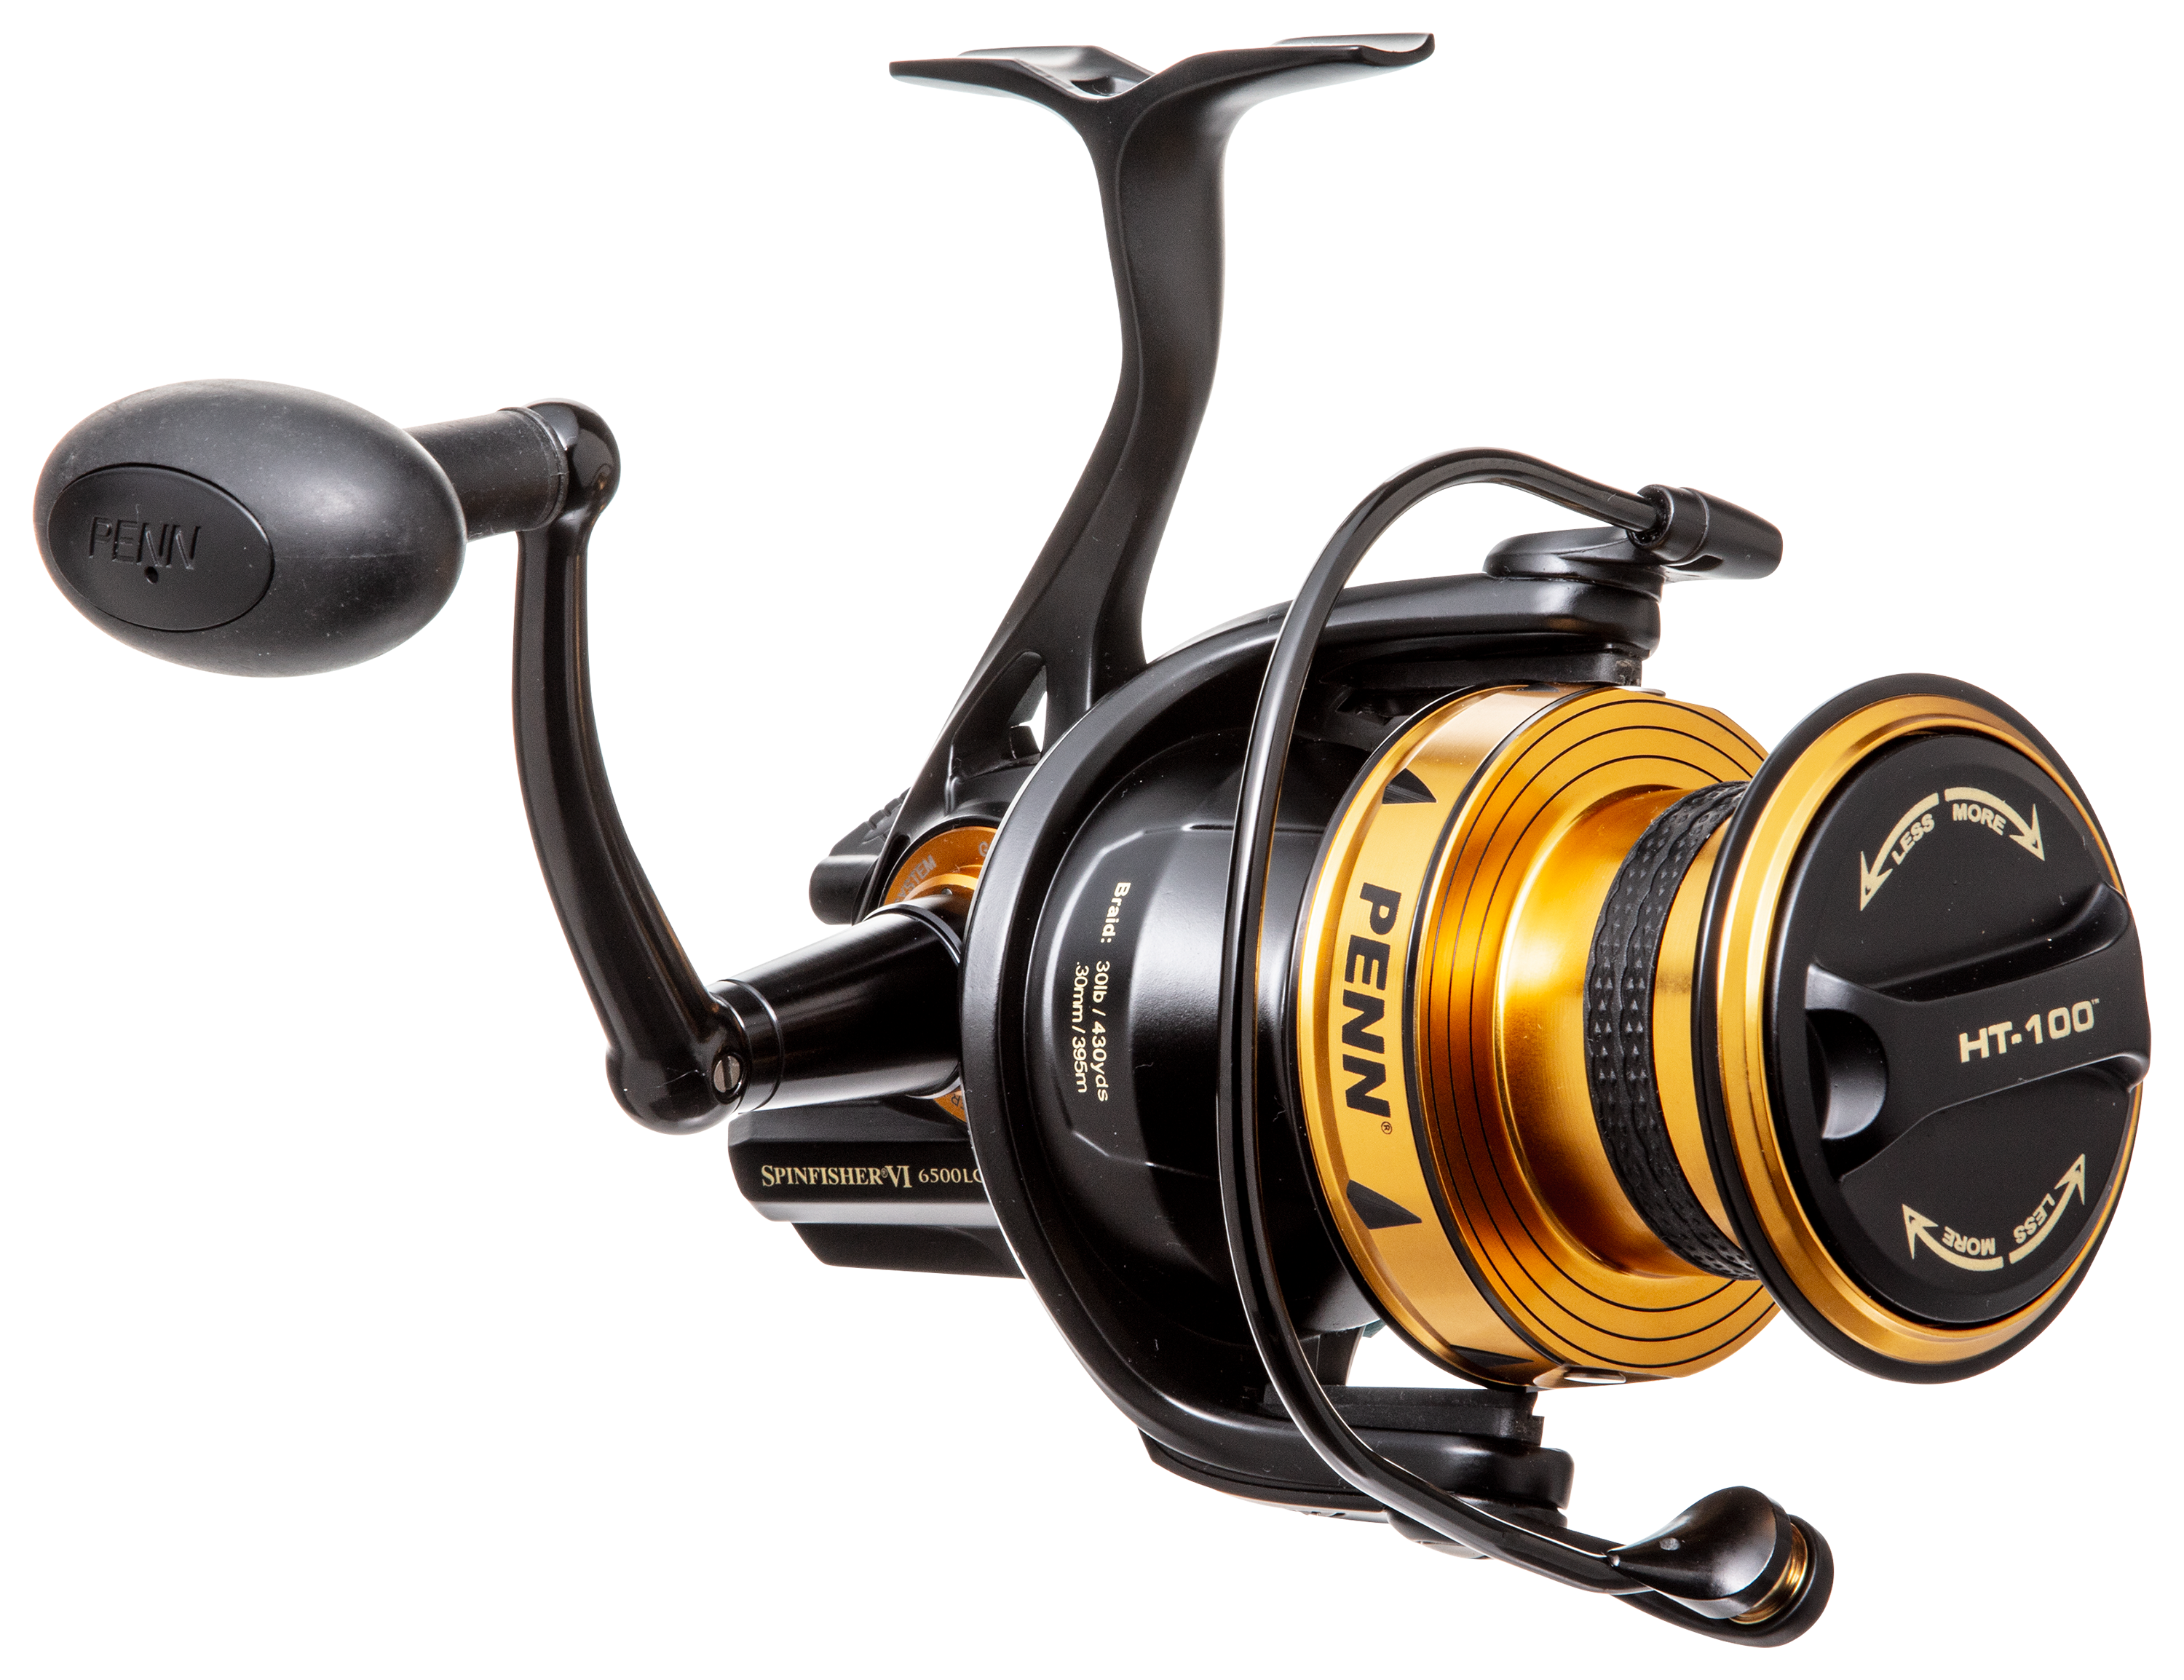 Penn Spinfisher VI LC Long Cast Reels at ICAST 2018 